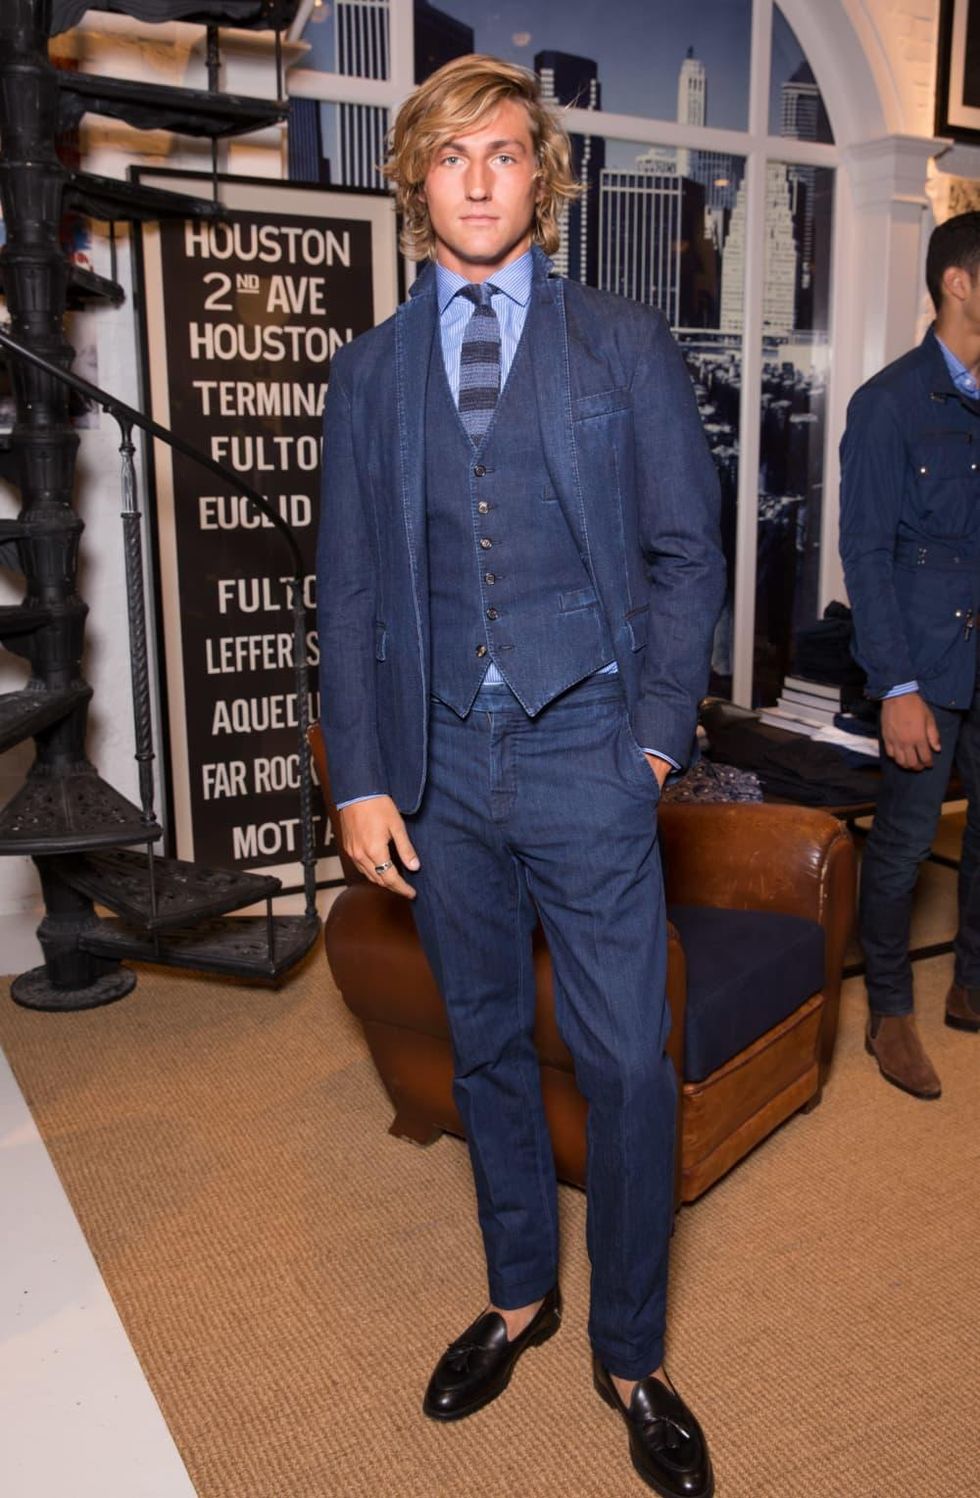 Polo Ralph Lauren offers men a lot of stylish ways to dress for any  occasion - CultureMap Houston